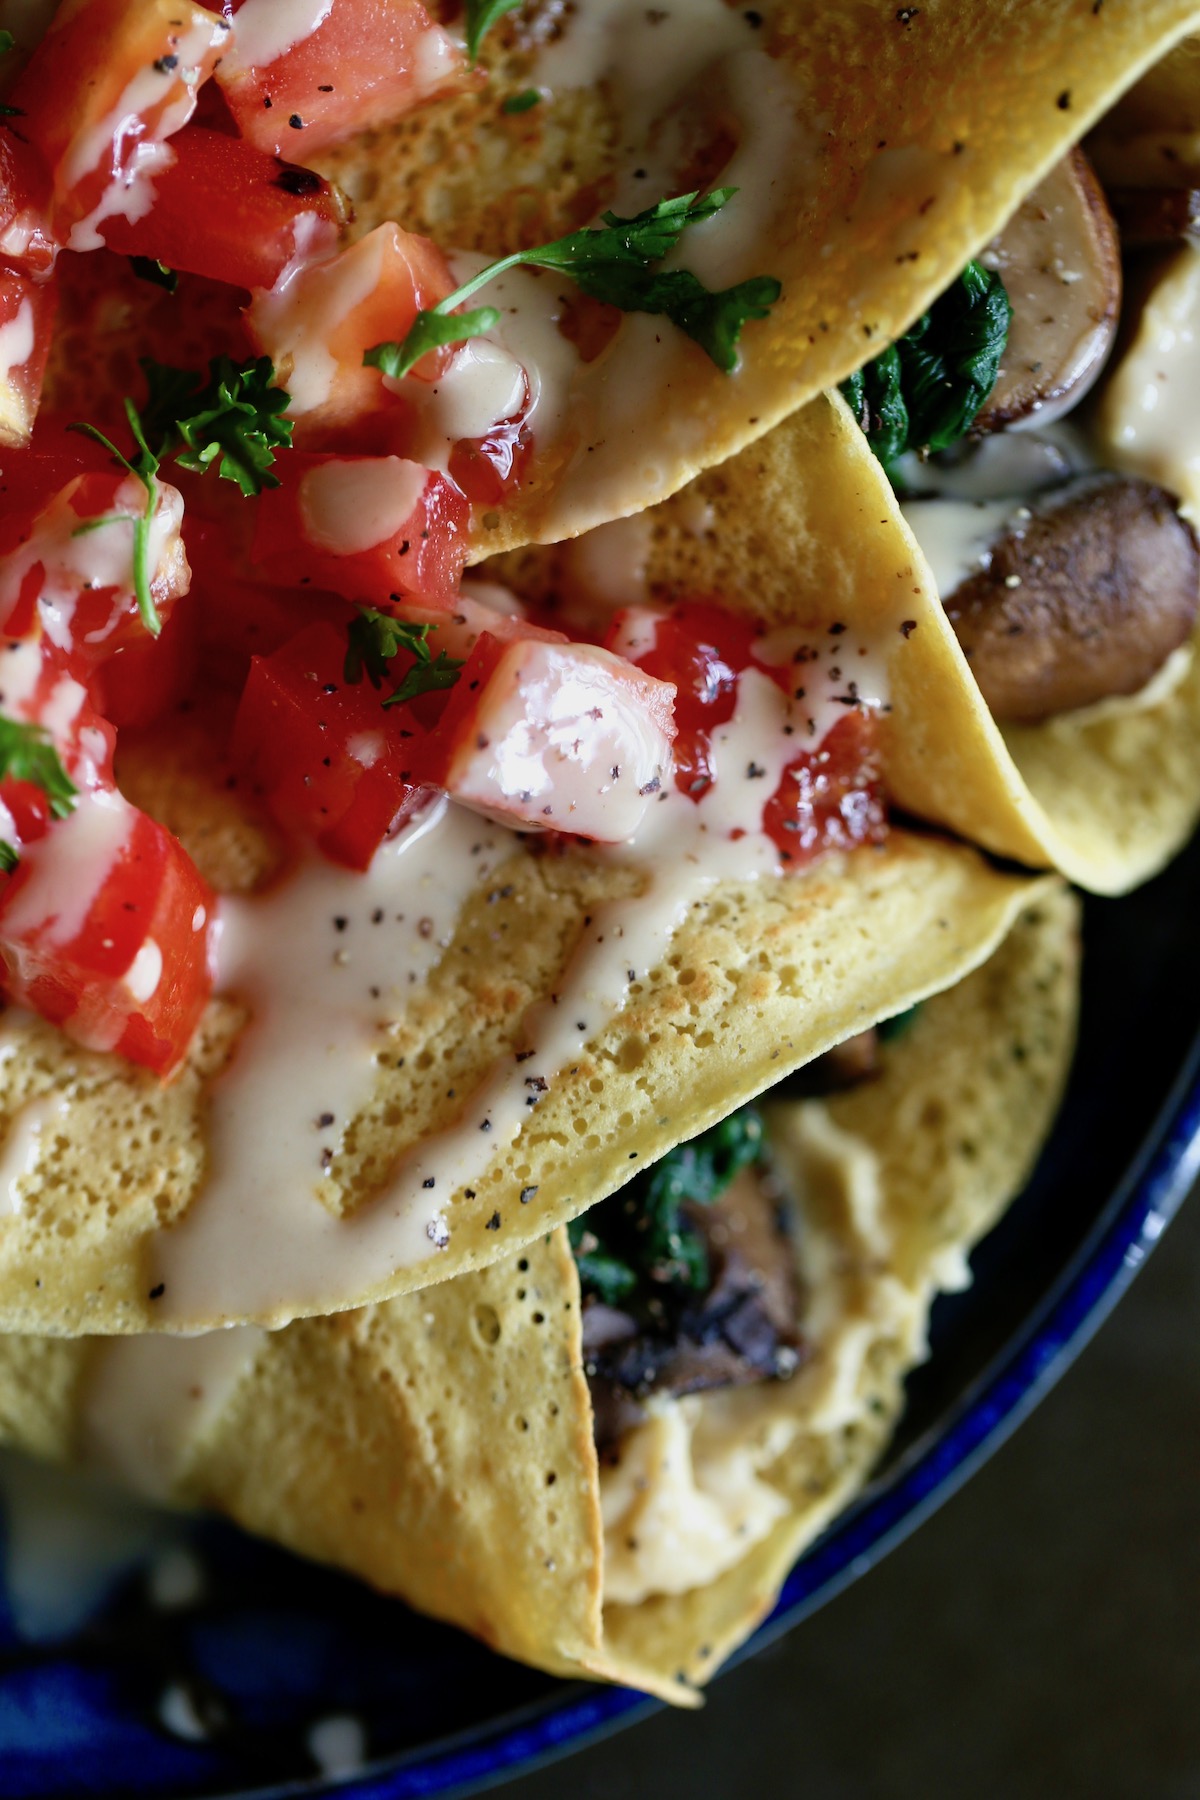 two savory chickpea flour crepes willed with hummus, sauteed mushrooms and greens and topped with runny tahini, tomatoes and parsley